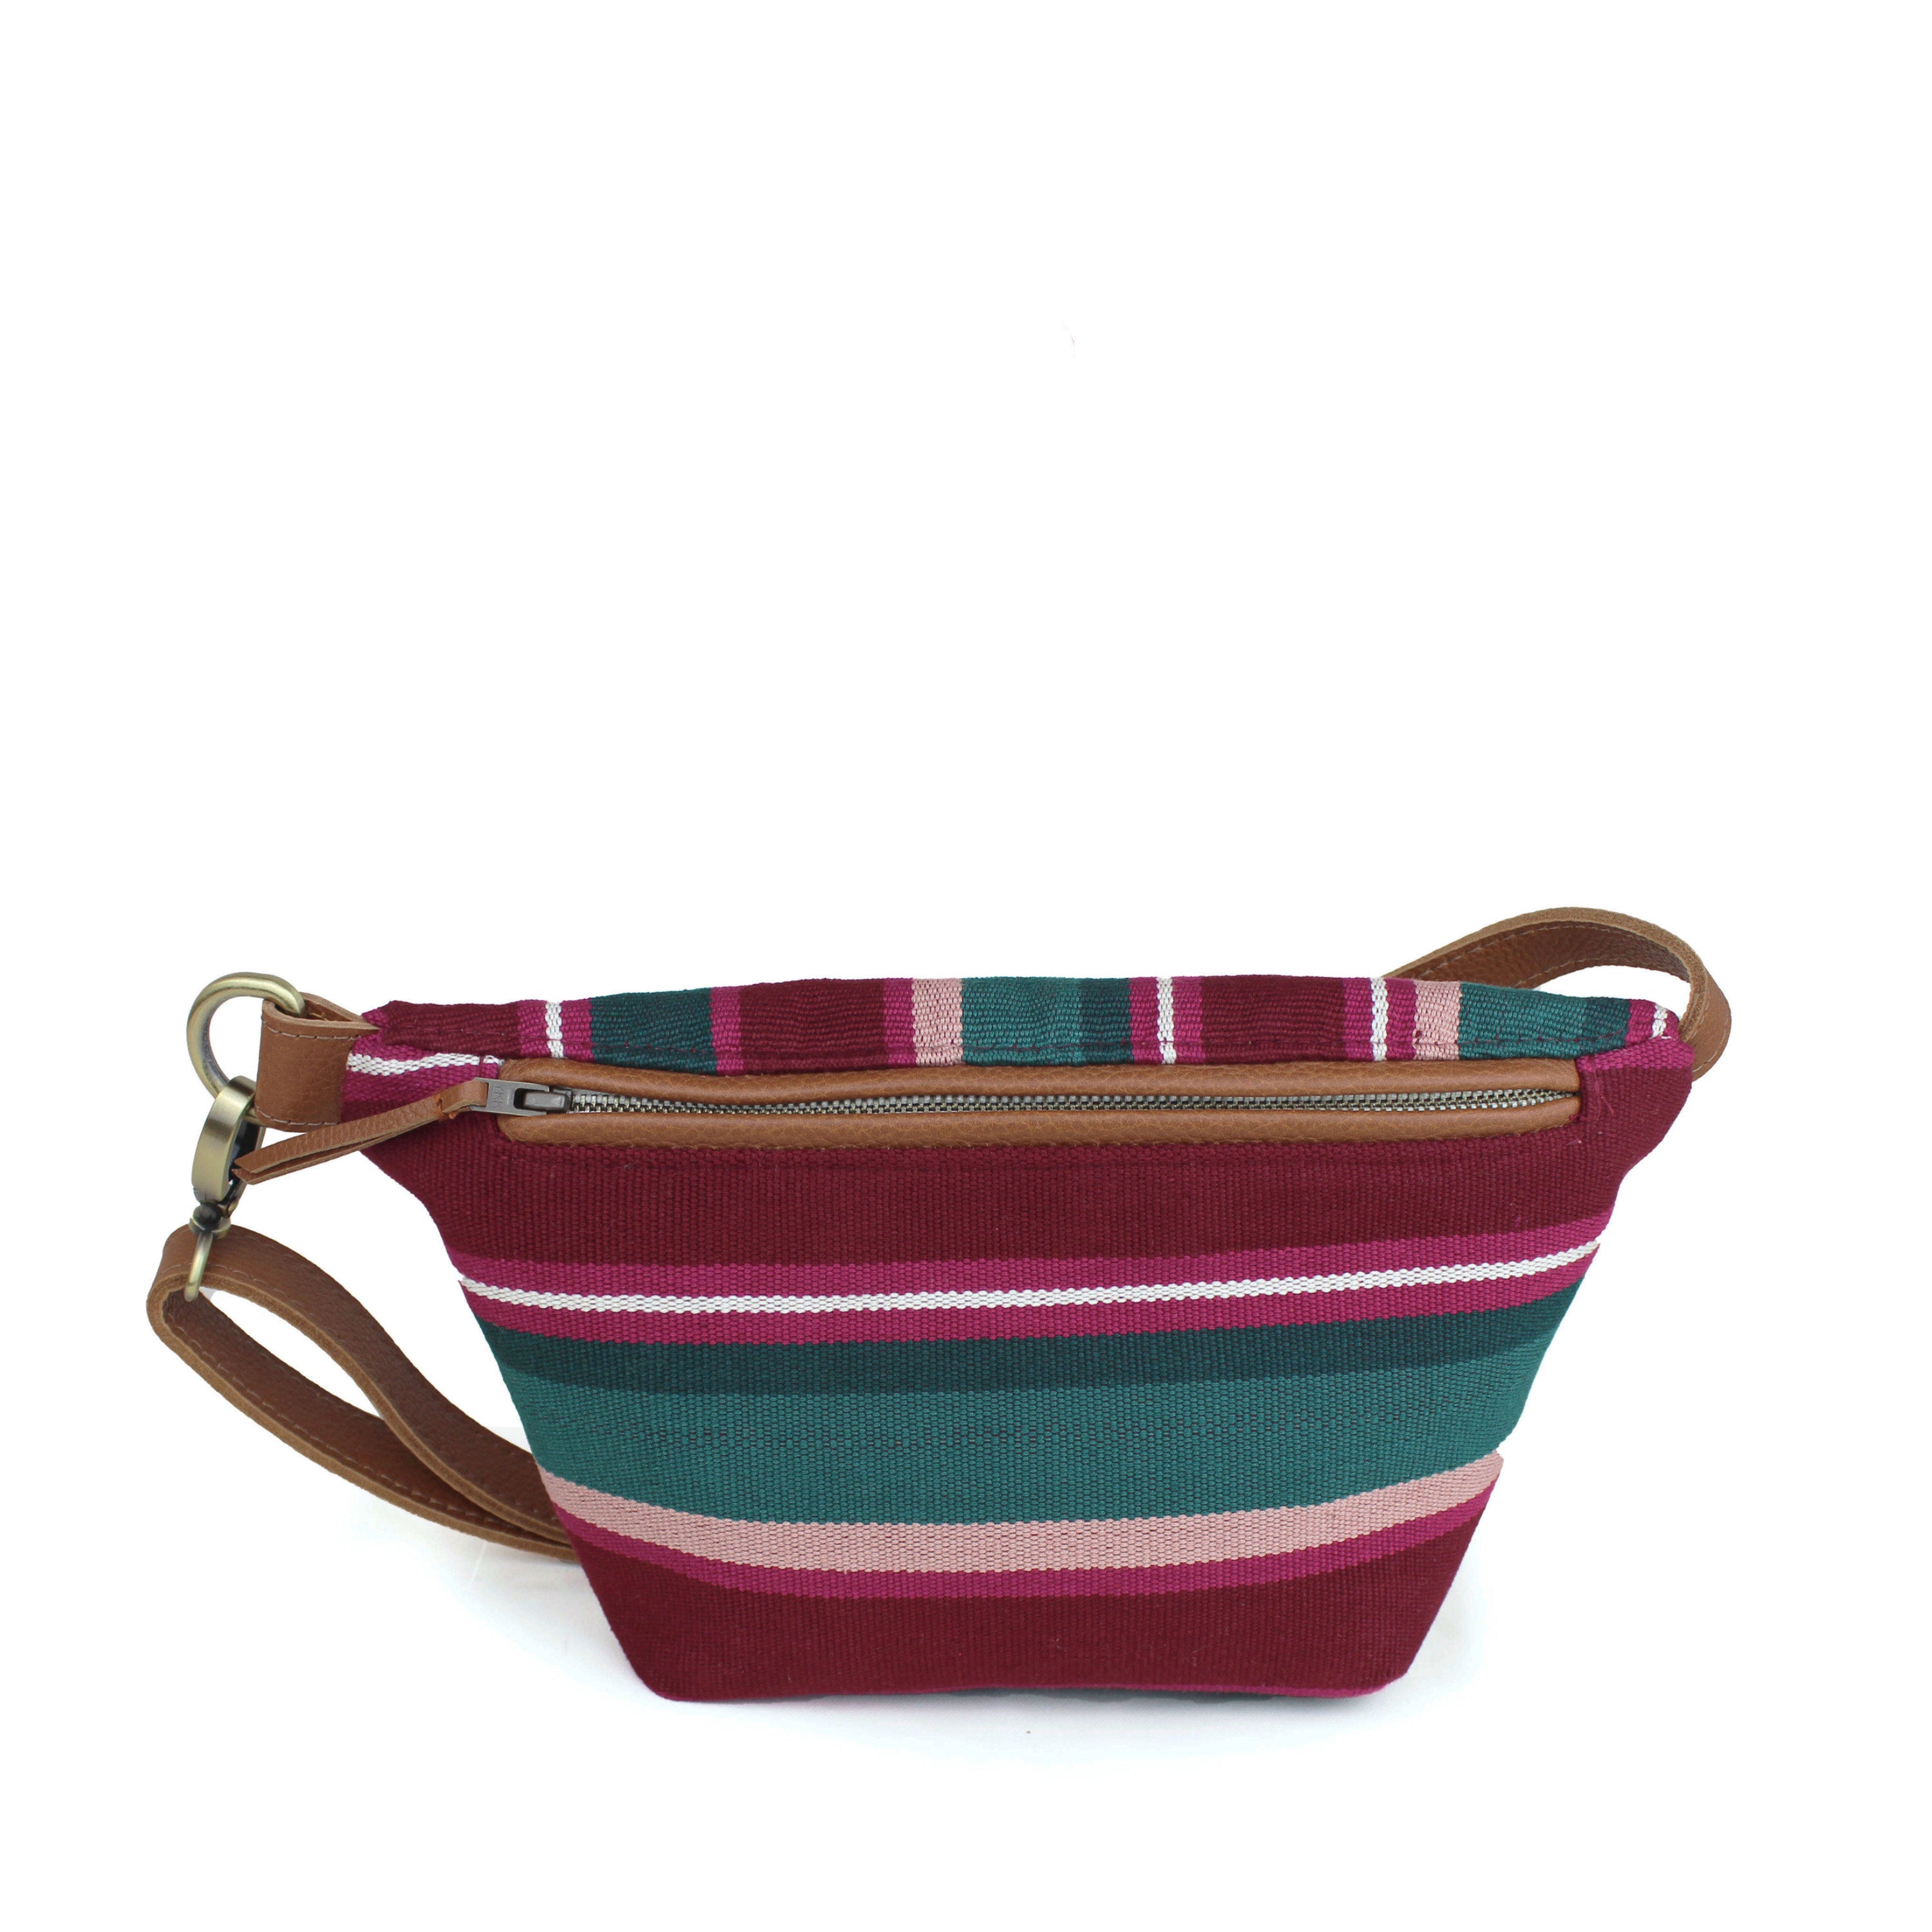 Front view of the Cruza Artisan Handwoven Ginger Sling. It has a maroon, pink, and phthalo green pattern. The front in vertical stripes and back in horizontal stripes. It has a leather waist strap, a leather zipper pull, and leather hem for the zipper.